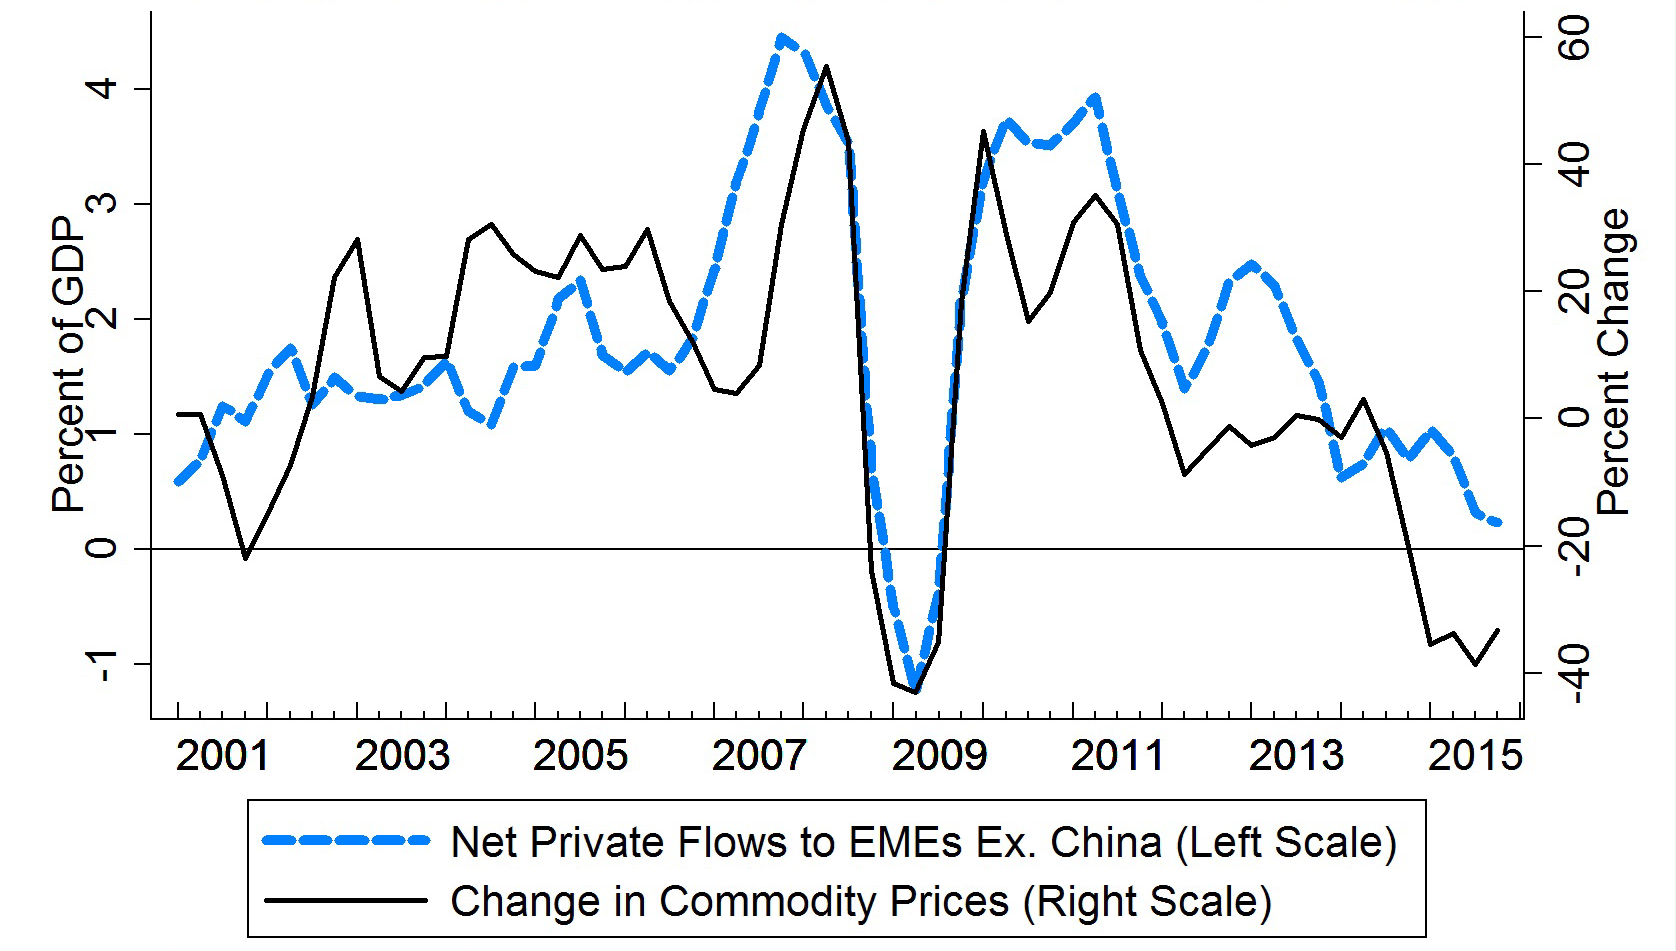 Chart 10: Net Private Flows and Commodity Prices. See accessible link for data.